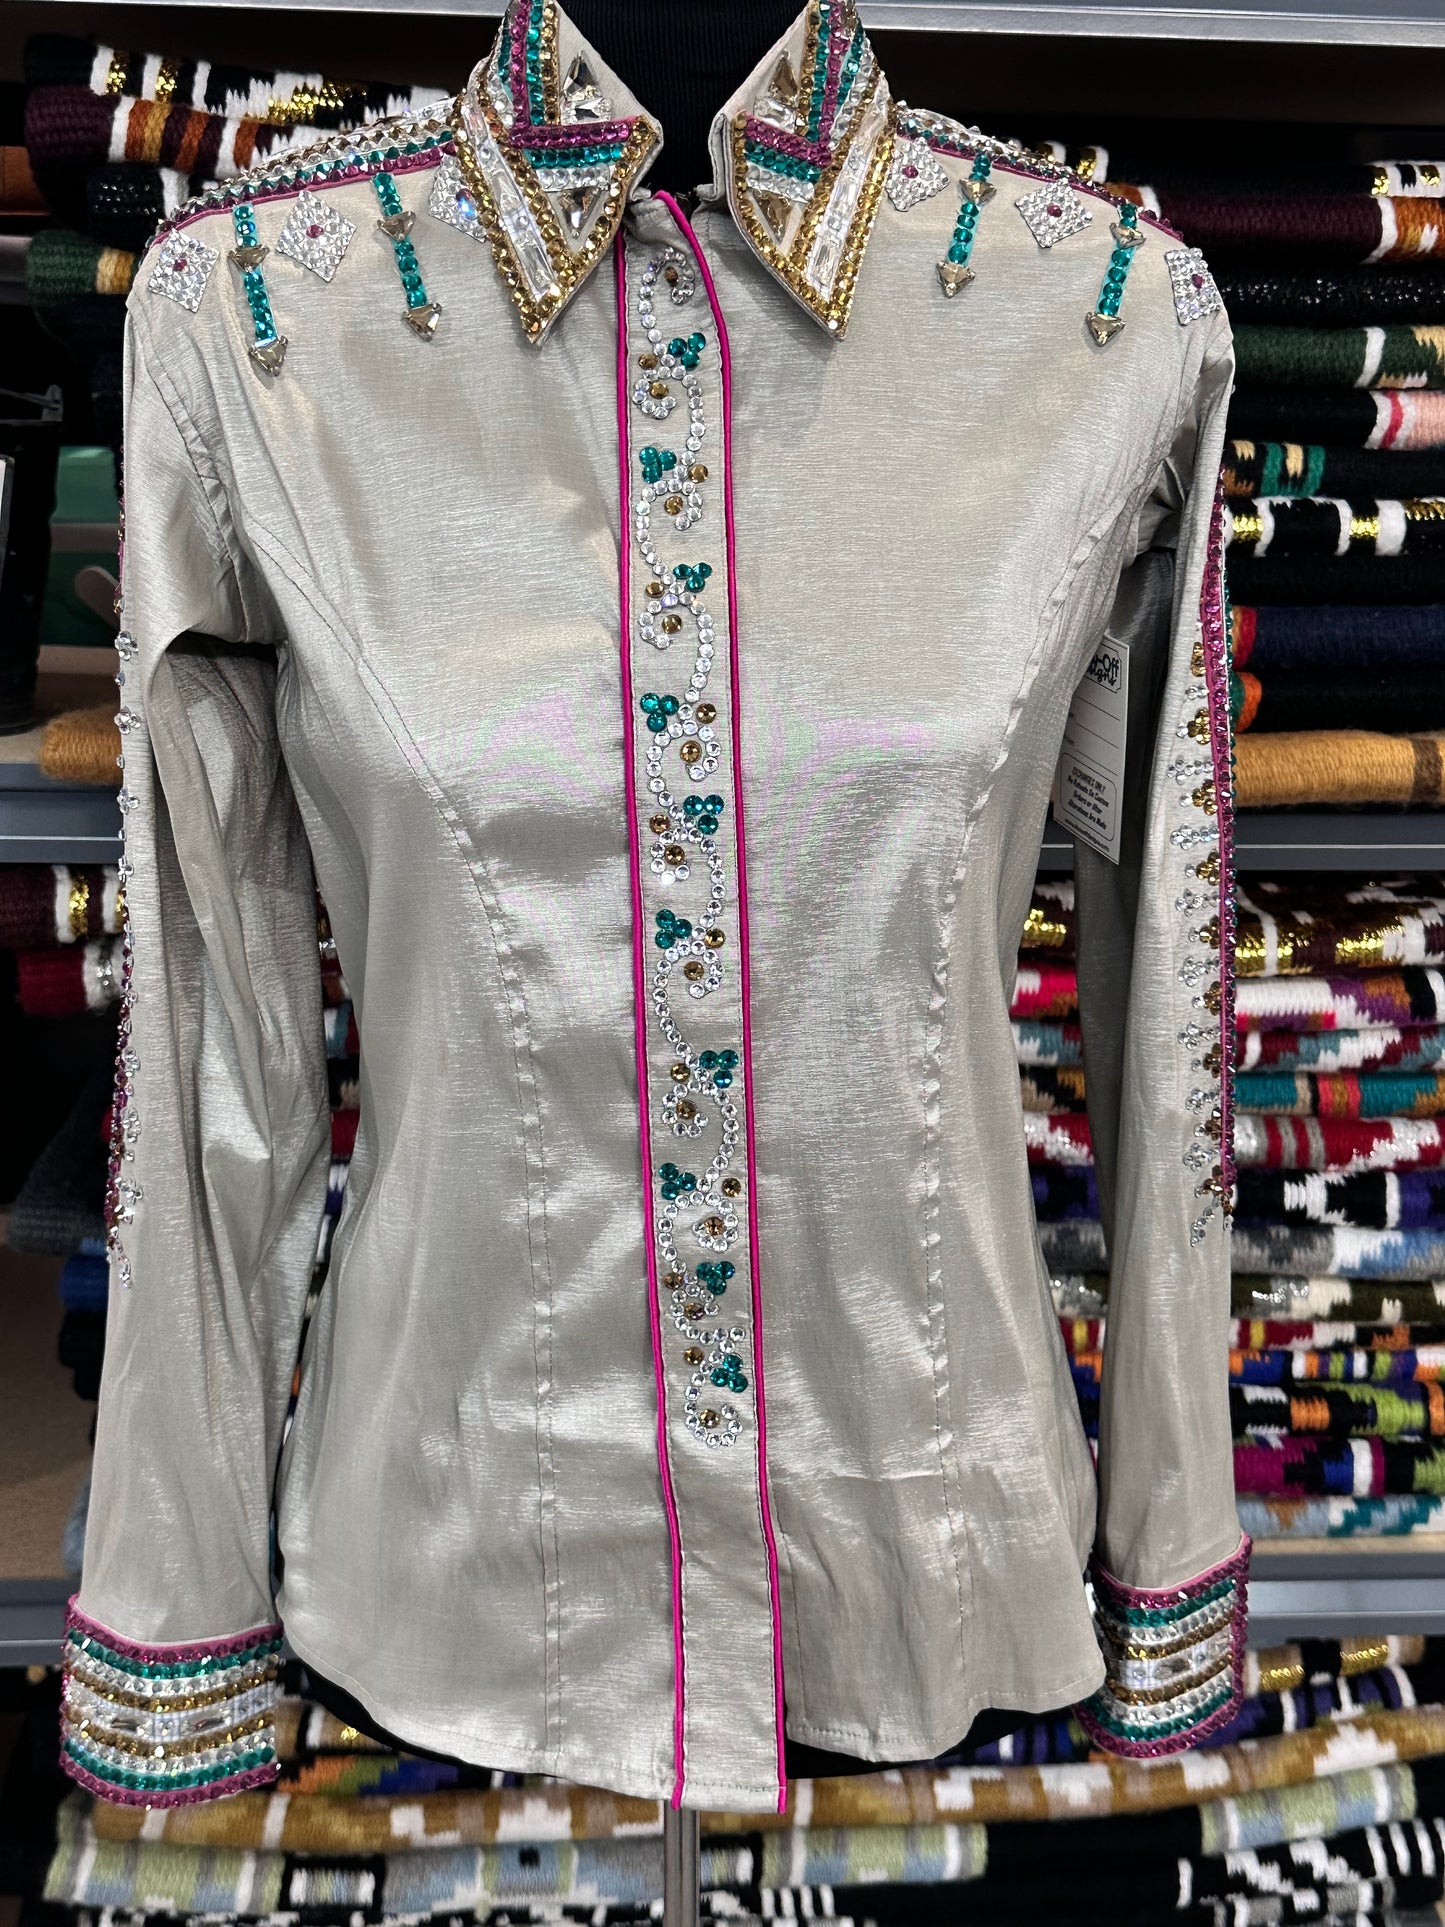 Day Shirt Size Medium silver stretch taffeta base with hidden zipper. Pink and turquoise accents